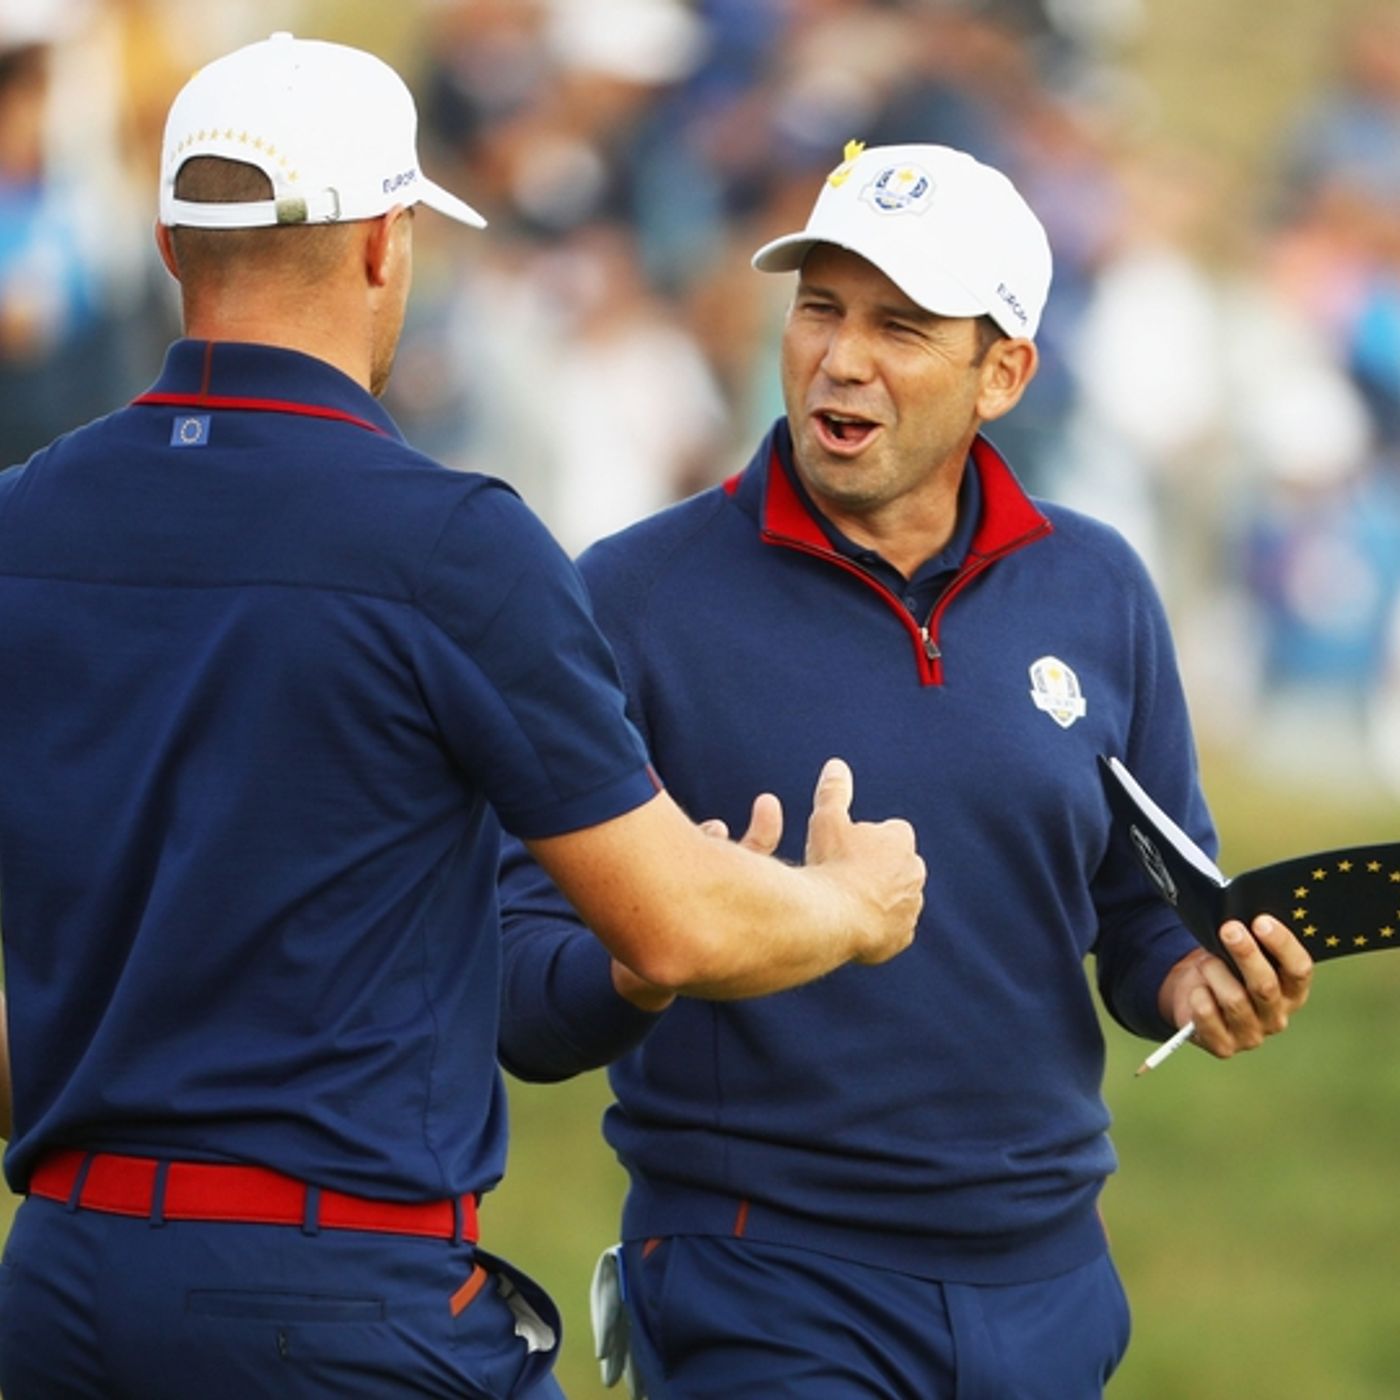 Ryder Cup 2018 – Day 1 Review